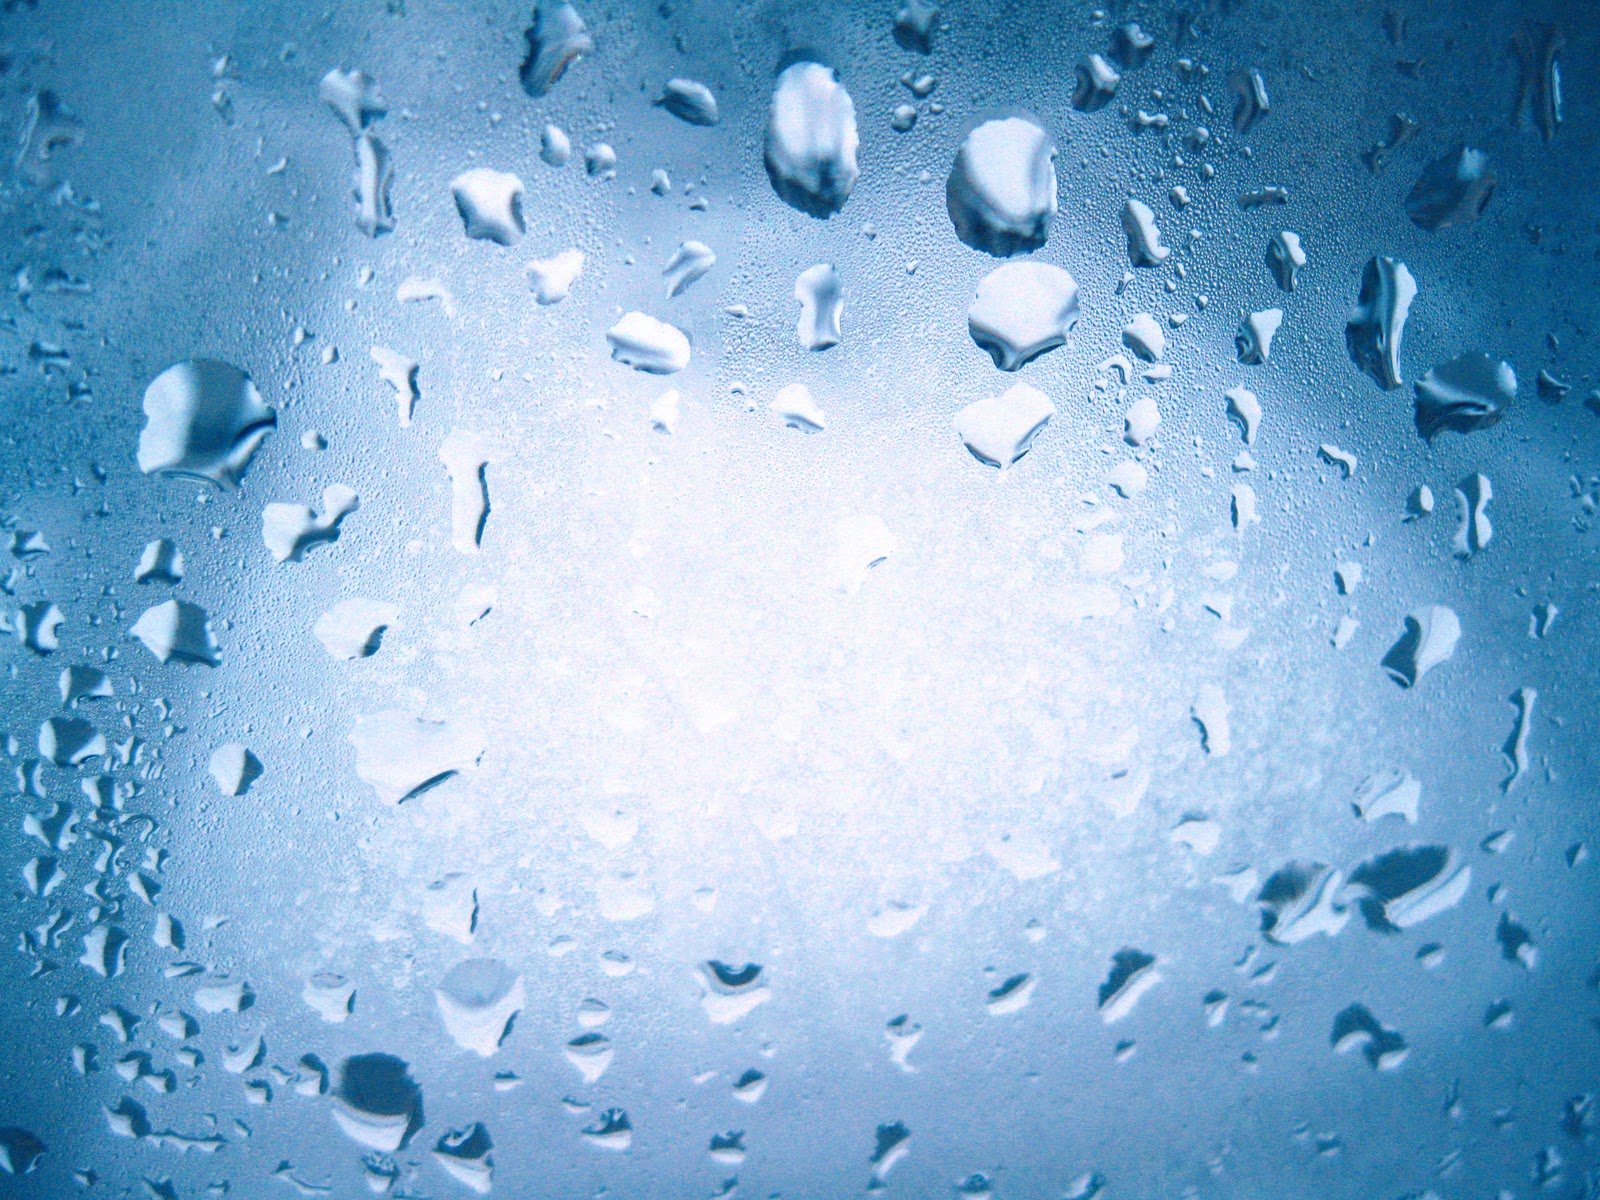 free stock photography, Textures, Water drops on glass cold condensation on window pane Wallpaper